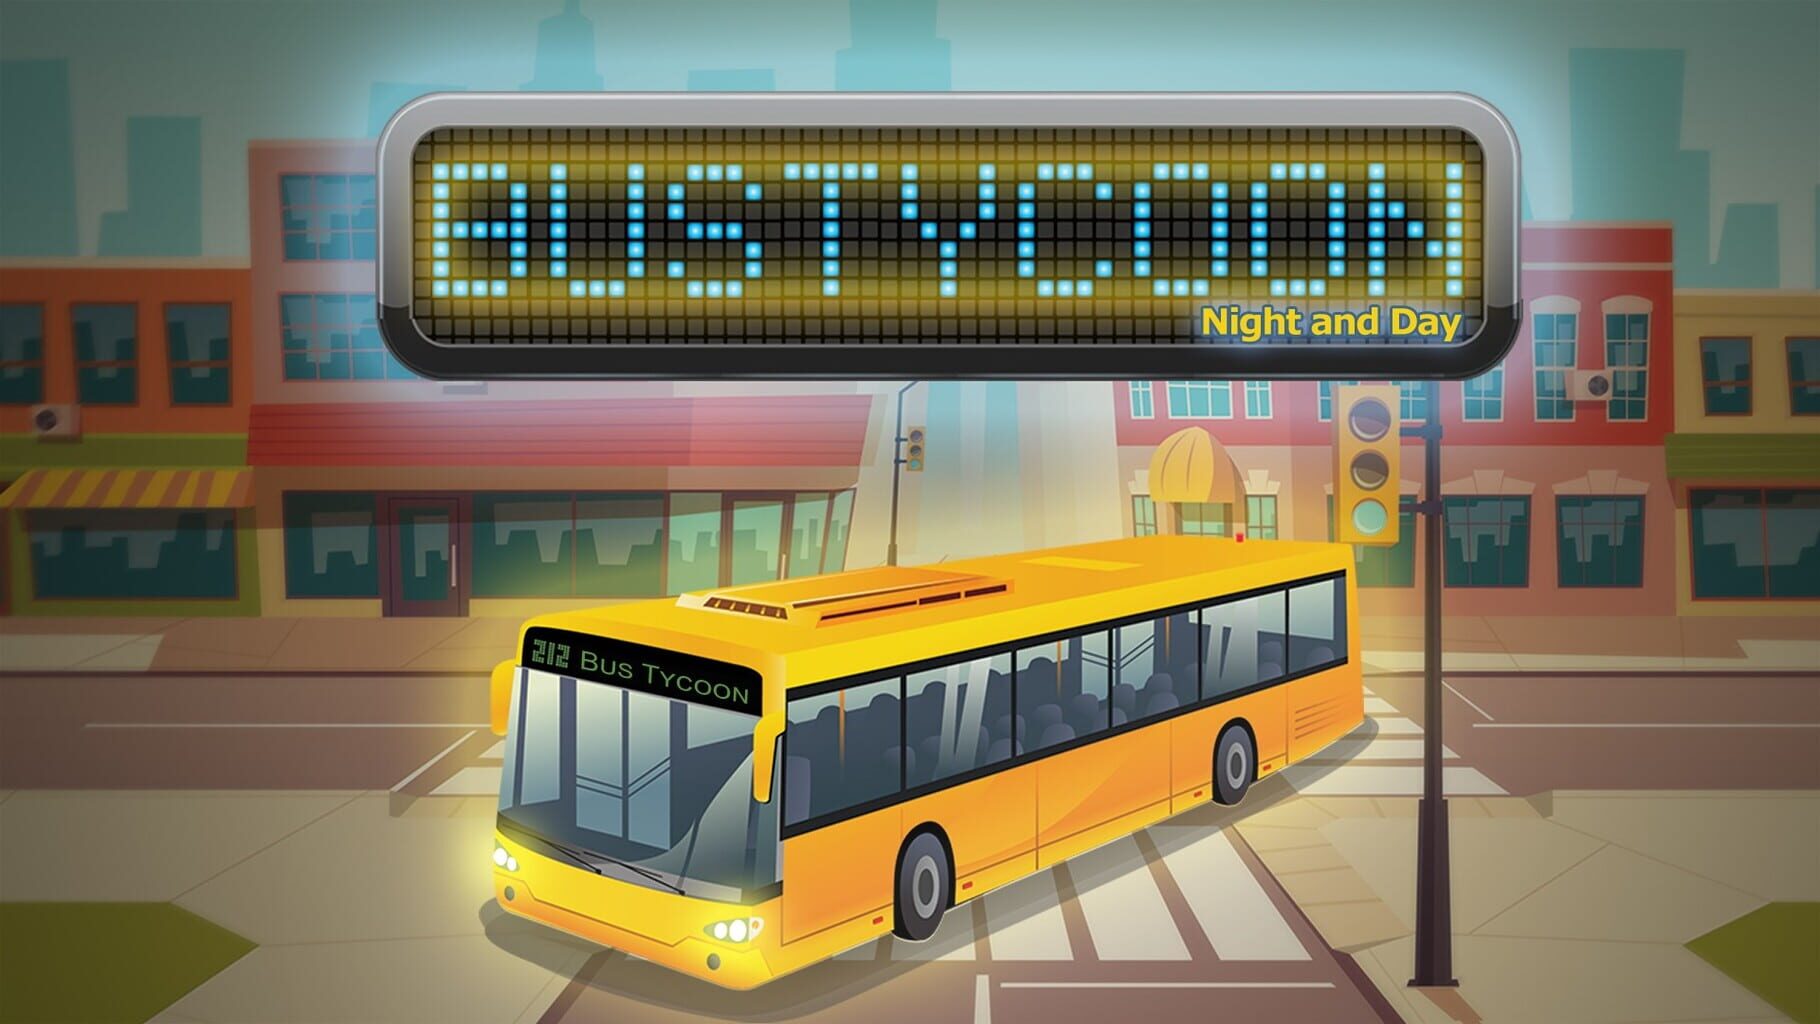 Bus Tycoon Night and Day artwork